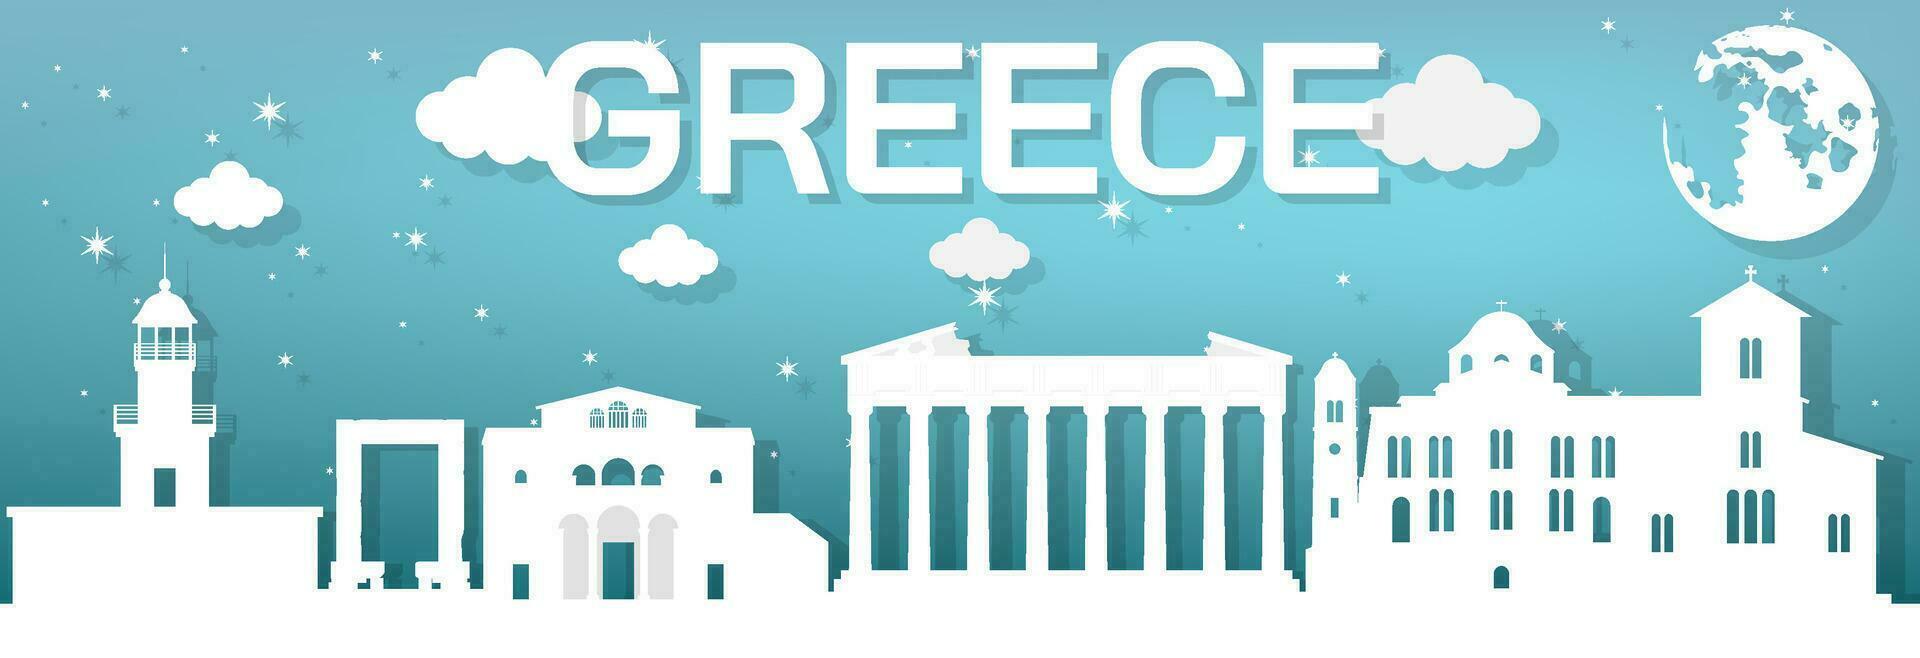 Landmarks of Greece Design like a white paper cutout placed on a blue background at night, vector illustration.